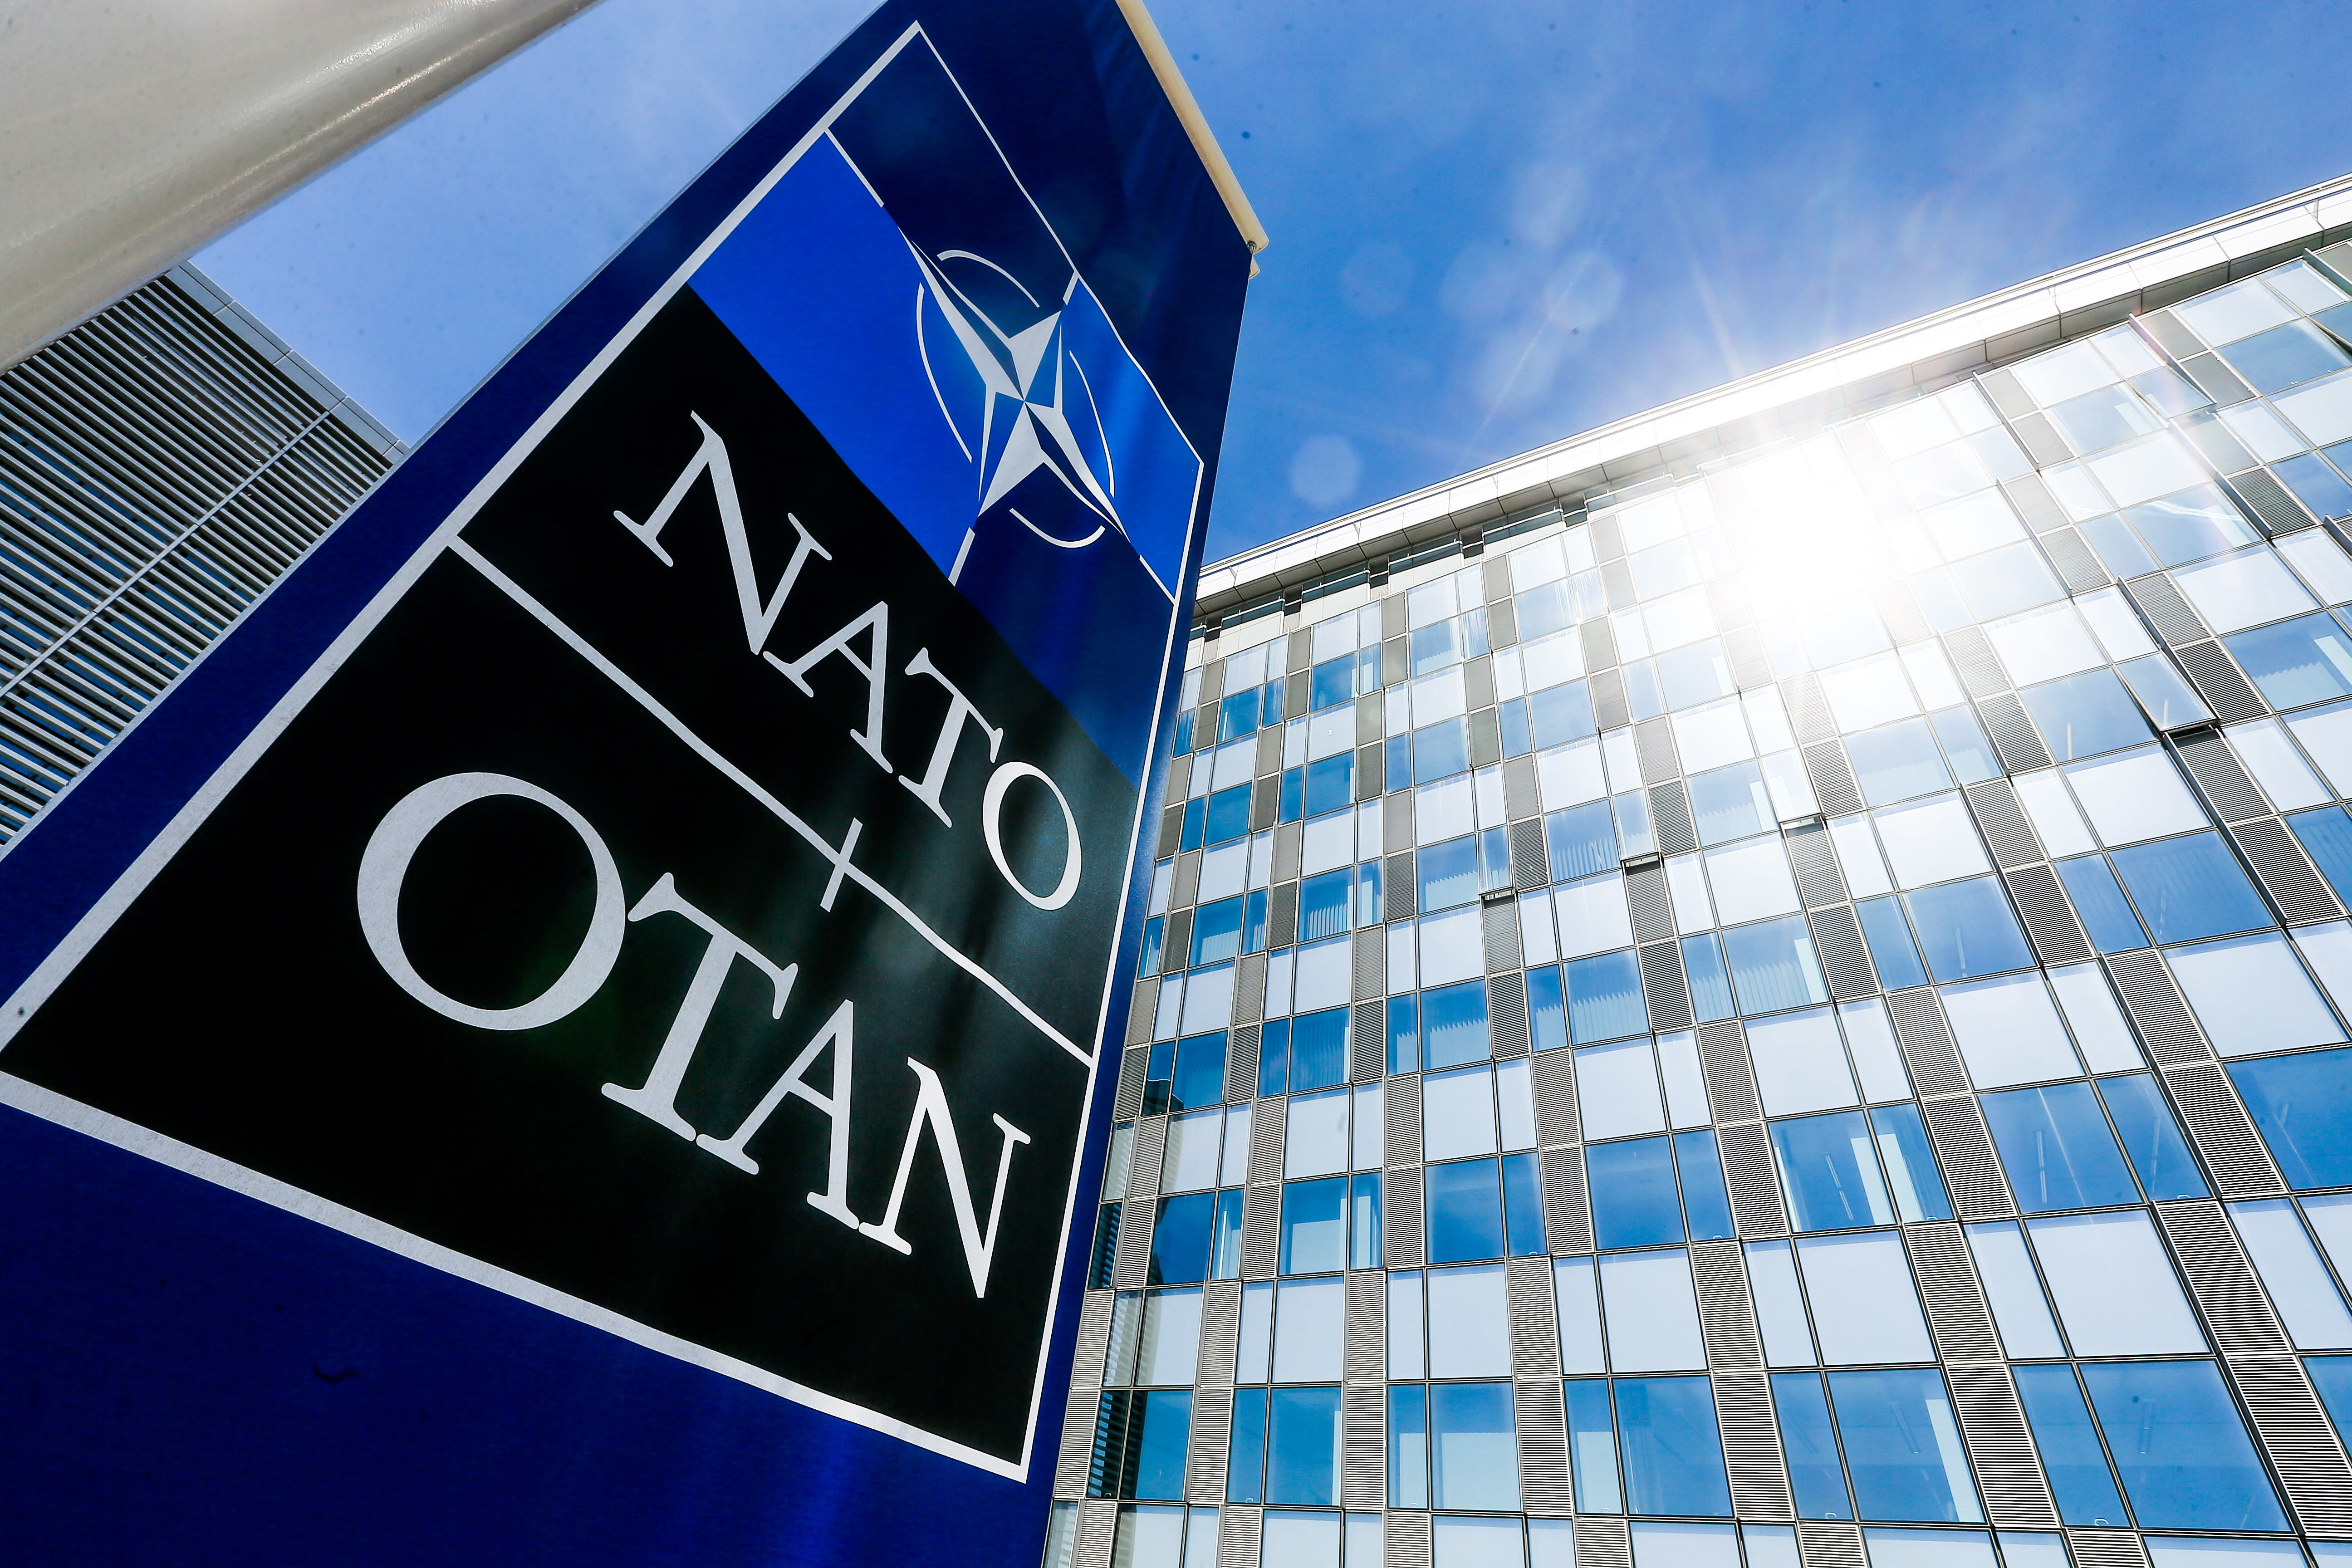 Finland and Sweden should stop "wasting NATO time"a Turkish politician tells a Swedish newspaper